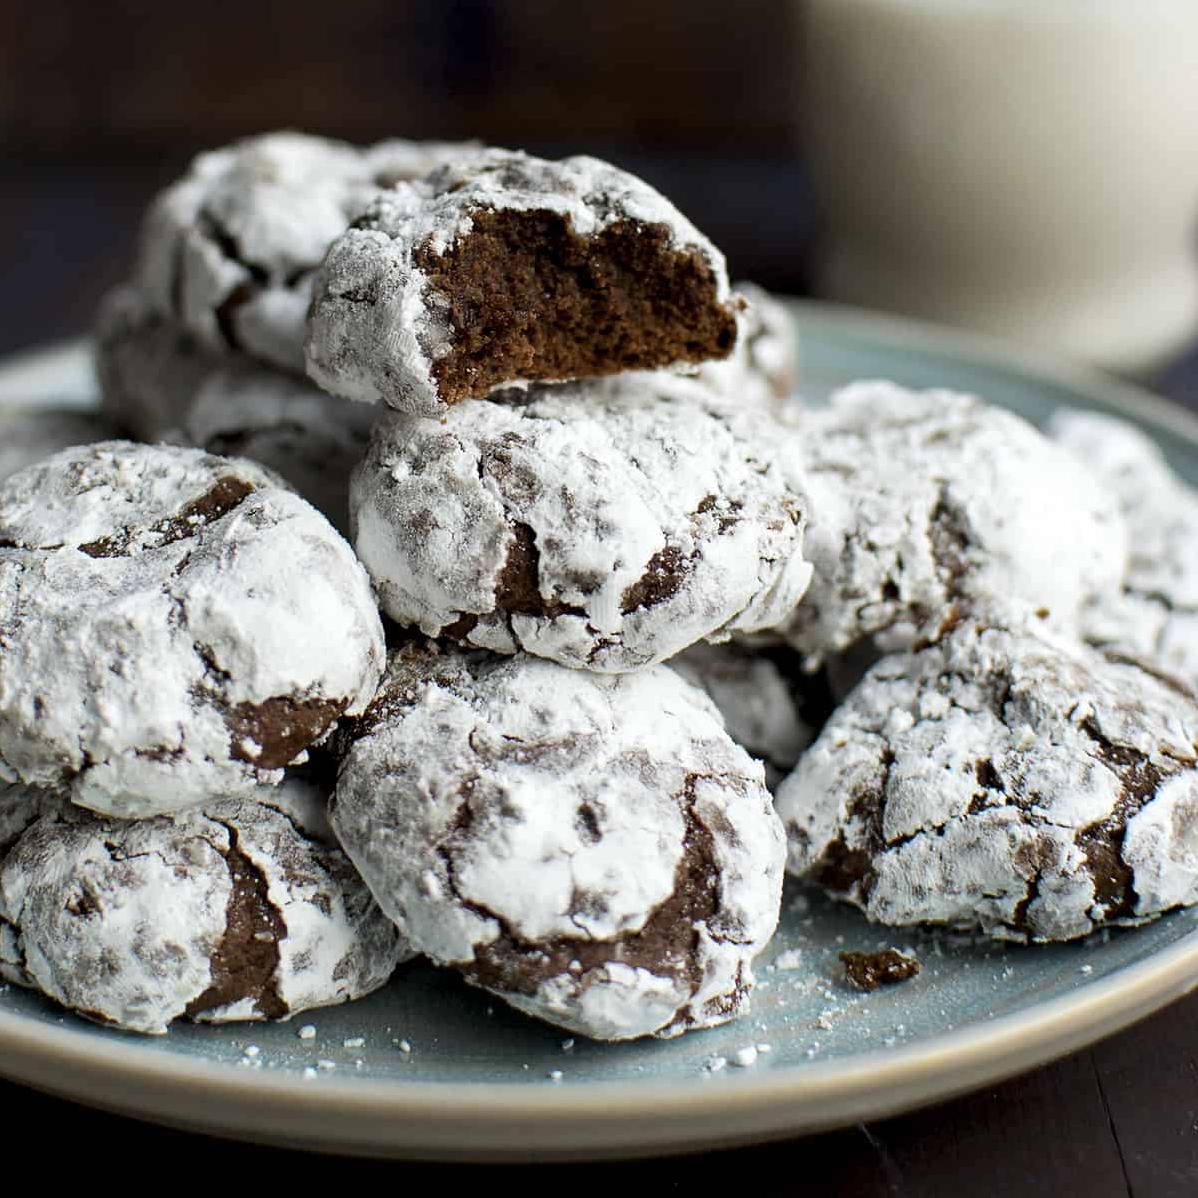  Who needs a hot cocoa when you can have Mocha Crinkles with a marshmallow on top?